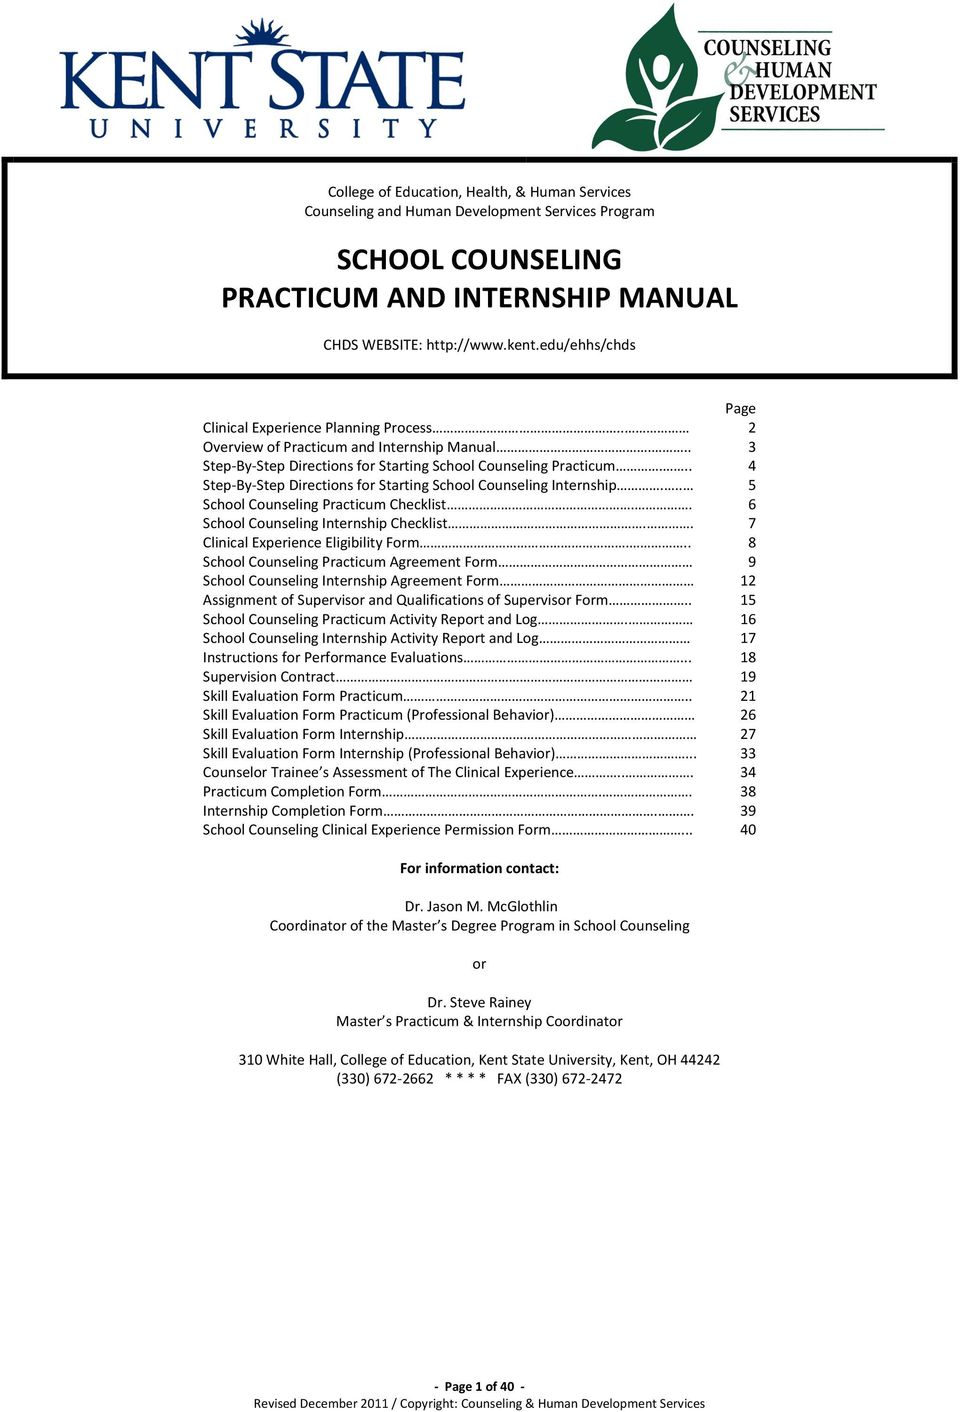 .. Step- By- Step Directions for Starting School Counseling Internship... School Counseling Practicum Checklist.. School Counseling Internship Checklist.. Clinical Experience Eligibility Form.